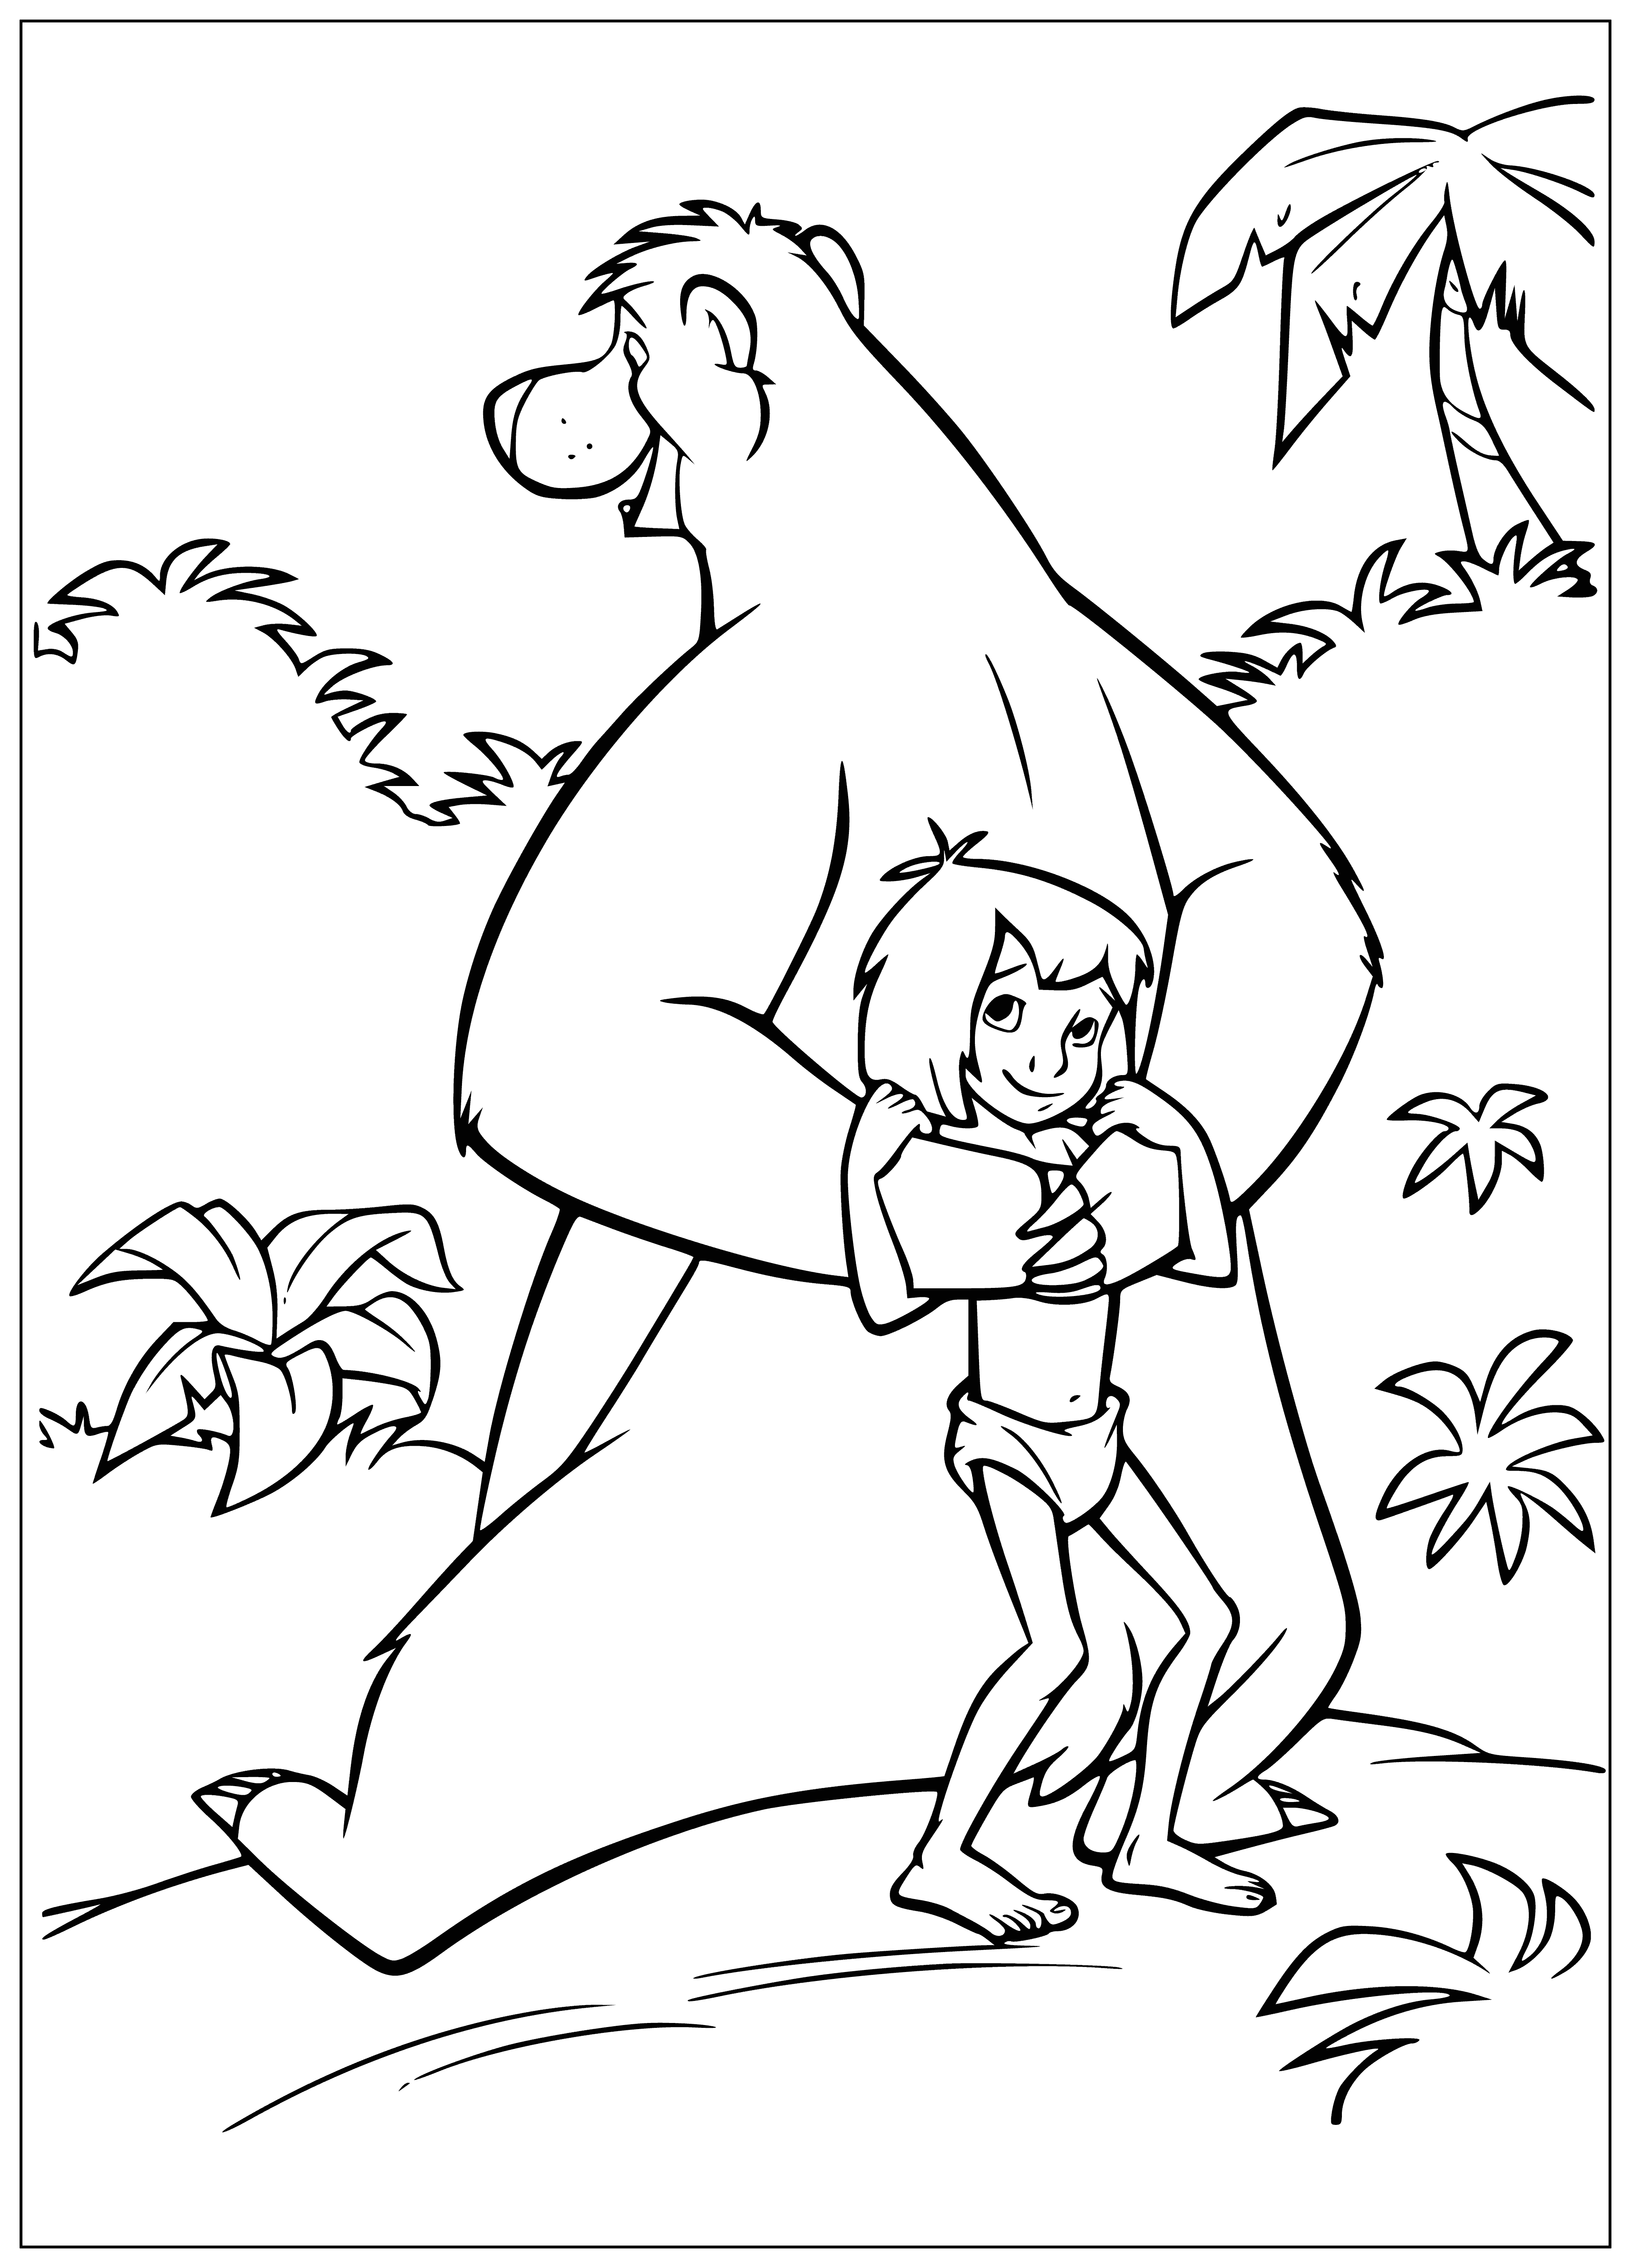 coloring page: Baloo hides Mowgli, a small, dark-skinned boy with black hair wearing a loincloth & tiger-skin cloth around his waist. Baloo is a large brown bear with black fur, standing on his hind legs.